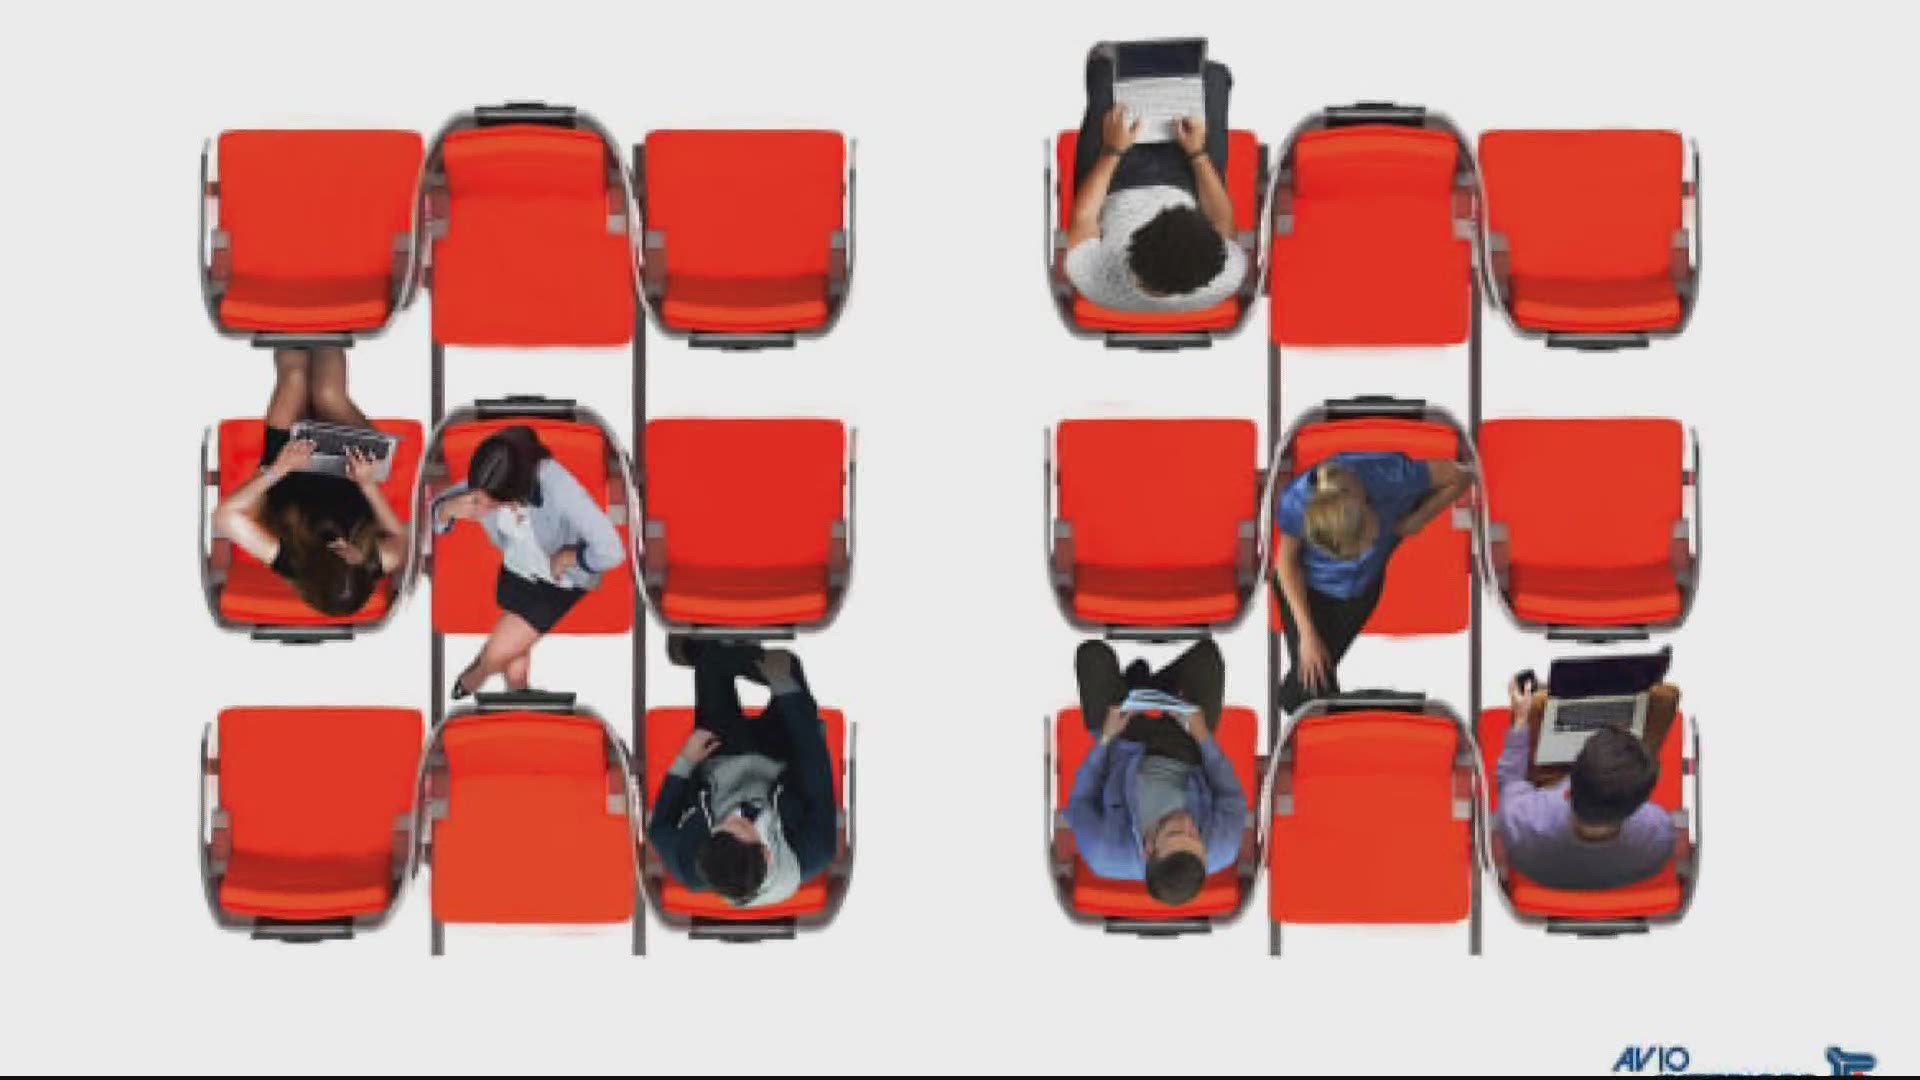 An Italy-based company that designs aircraft interiors has proposed seat designs to help travelers social distance on airplanes.